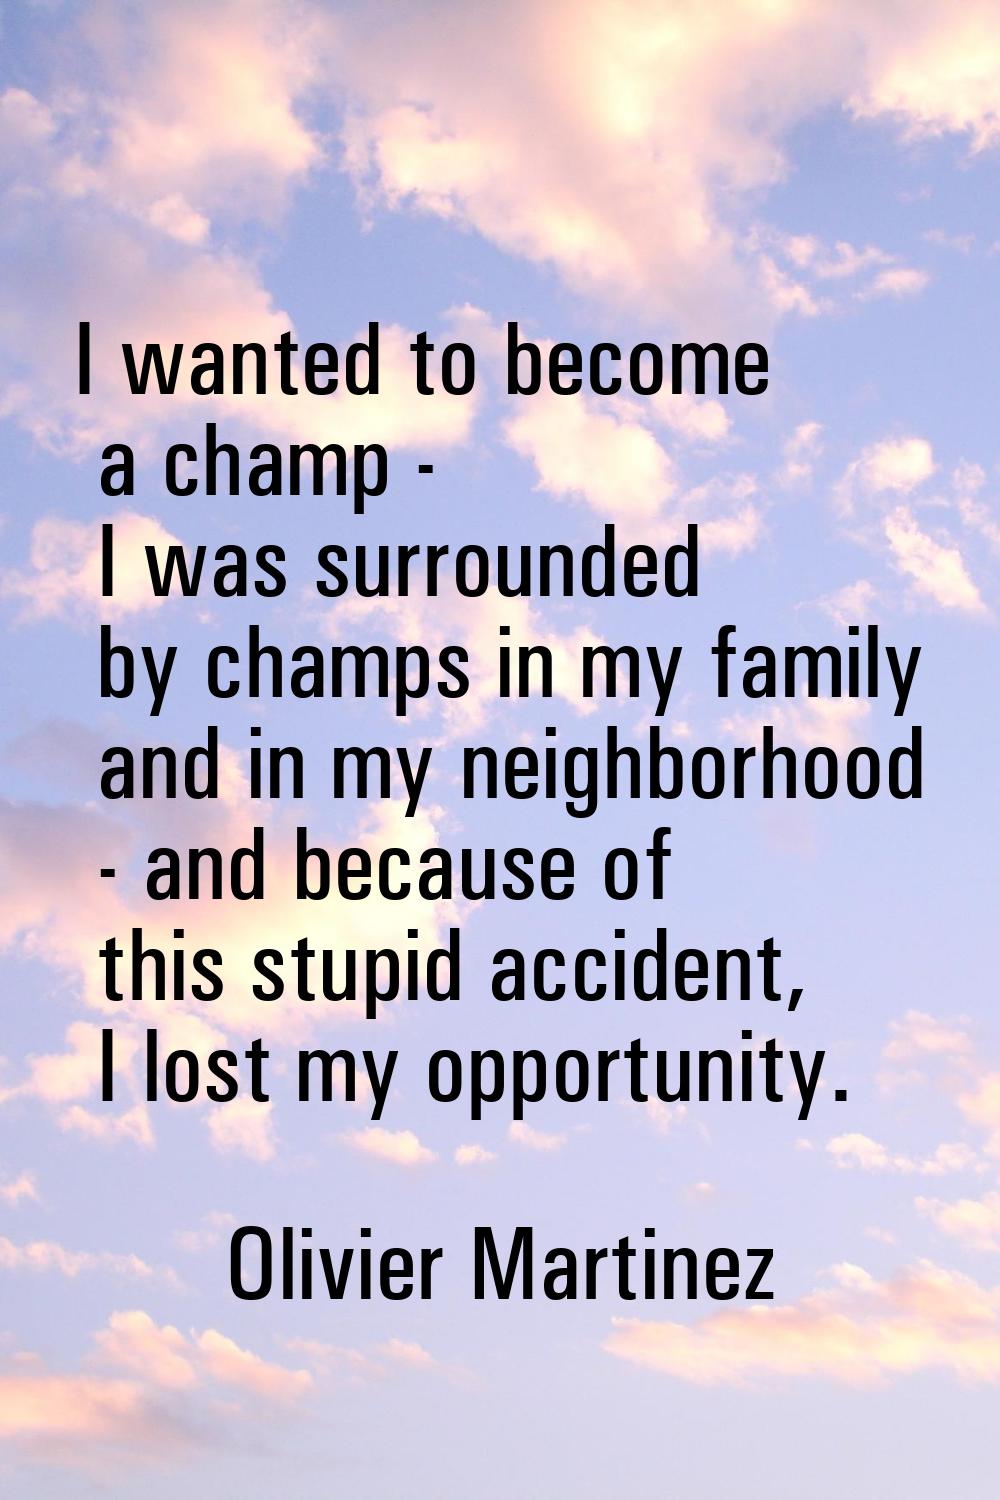 I wanted to become a champ - I was surrounded by champs in my family and in my neighborhood - and b